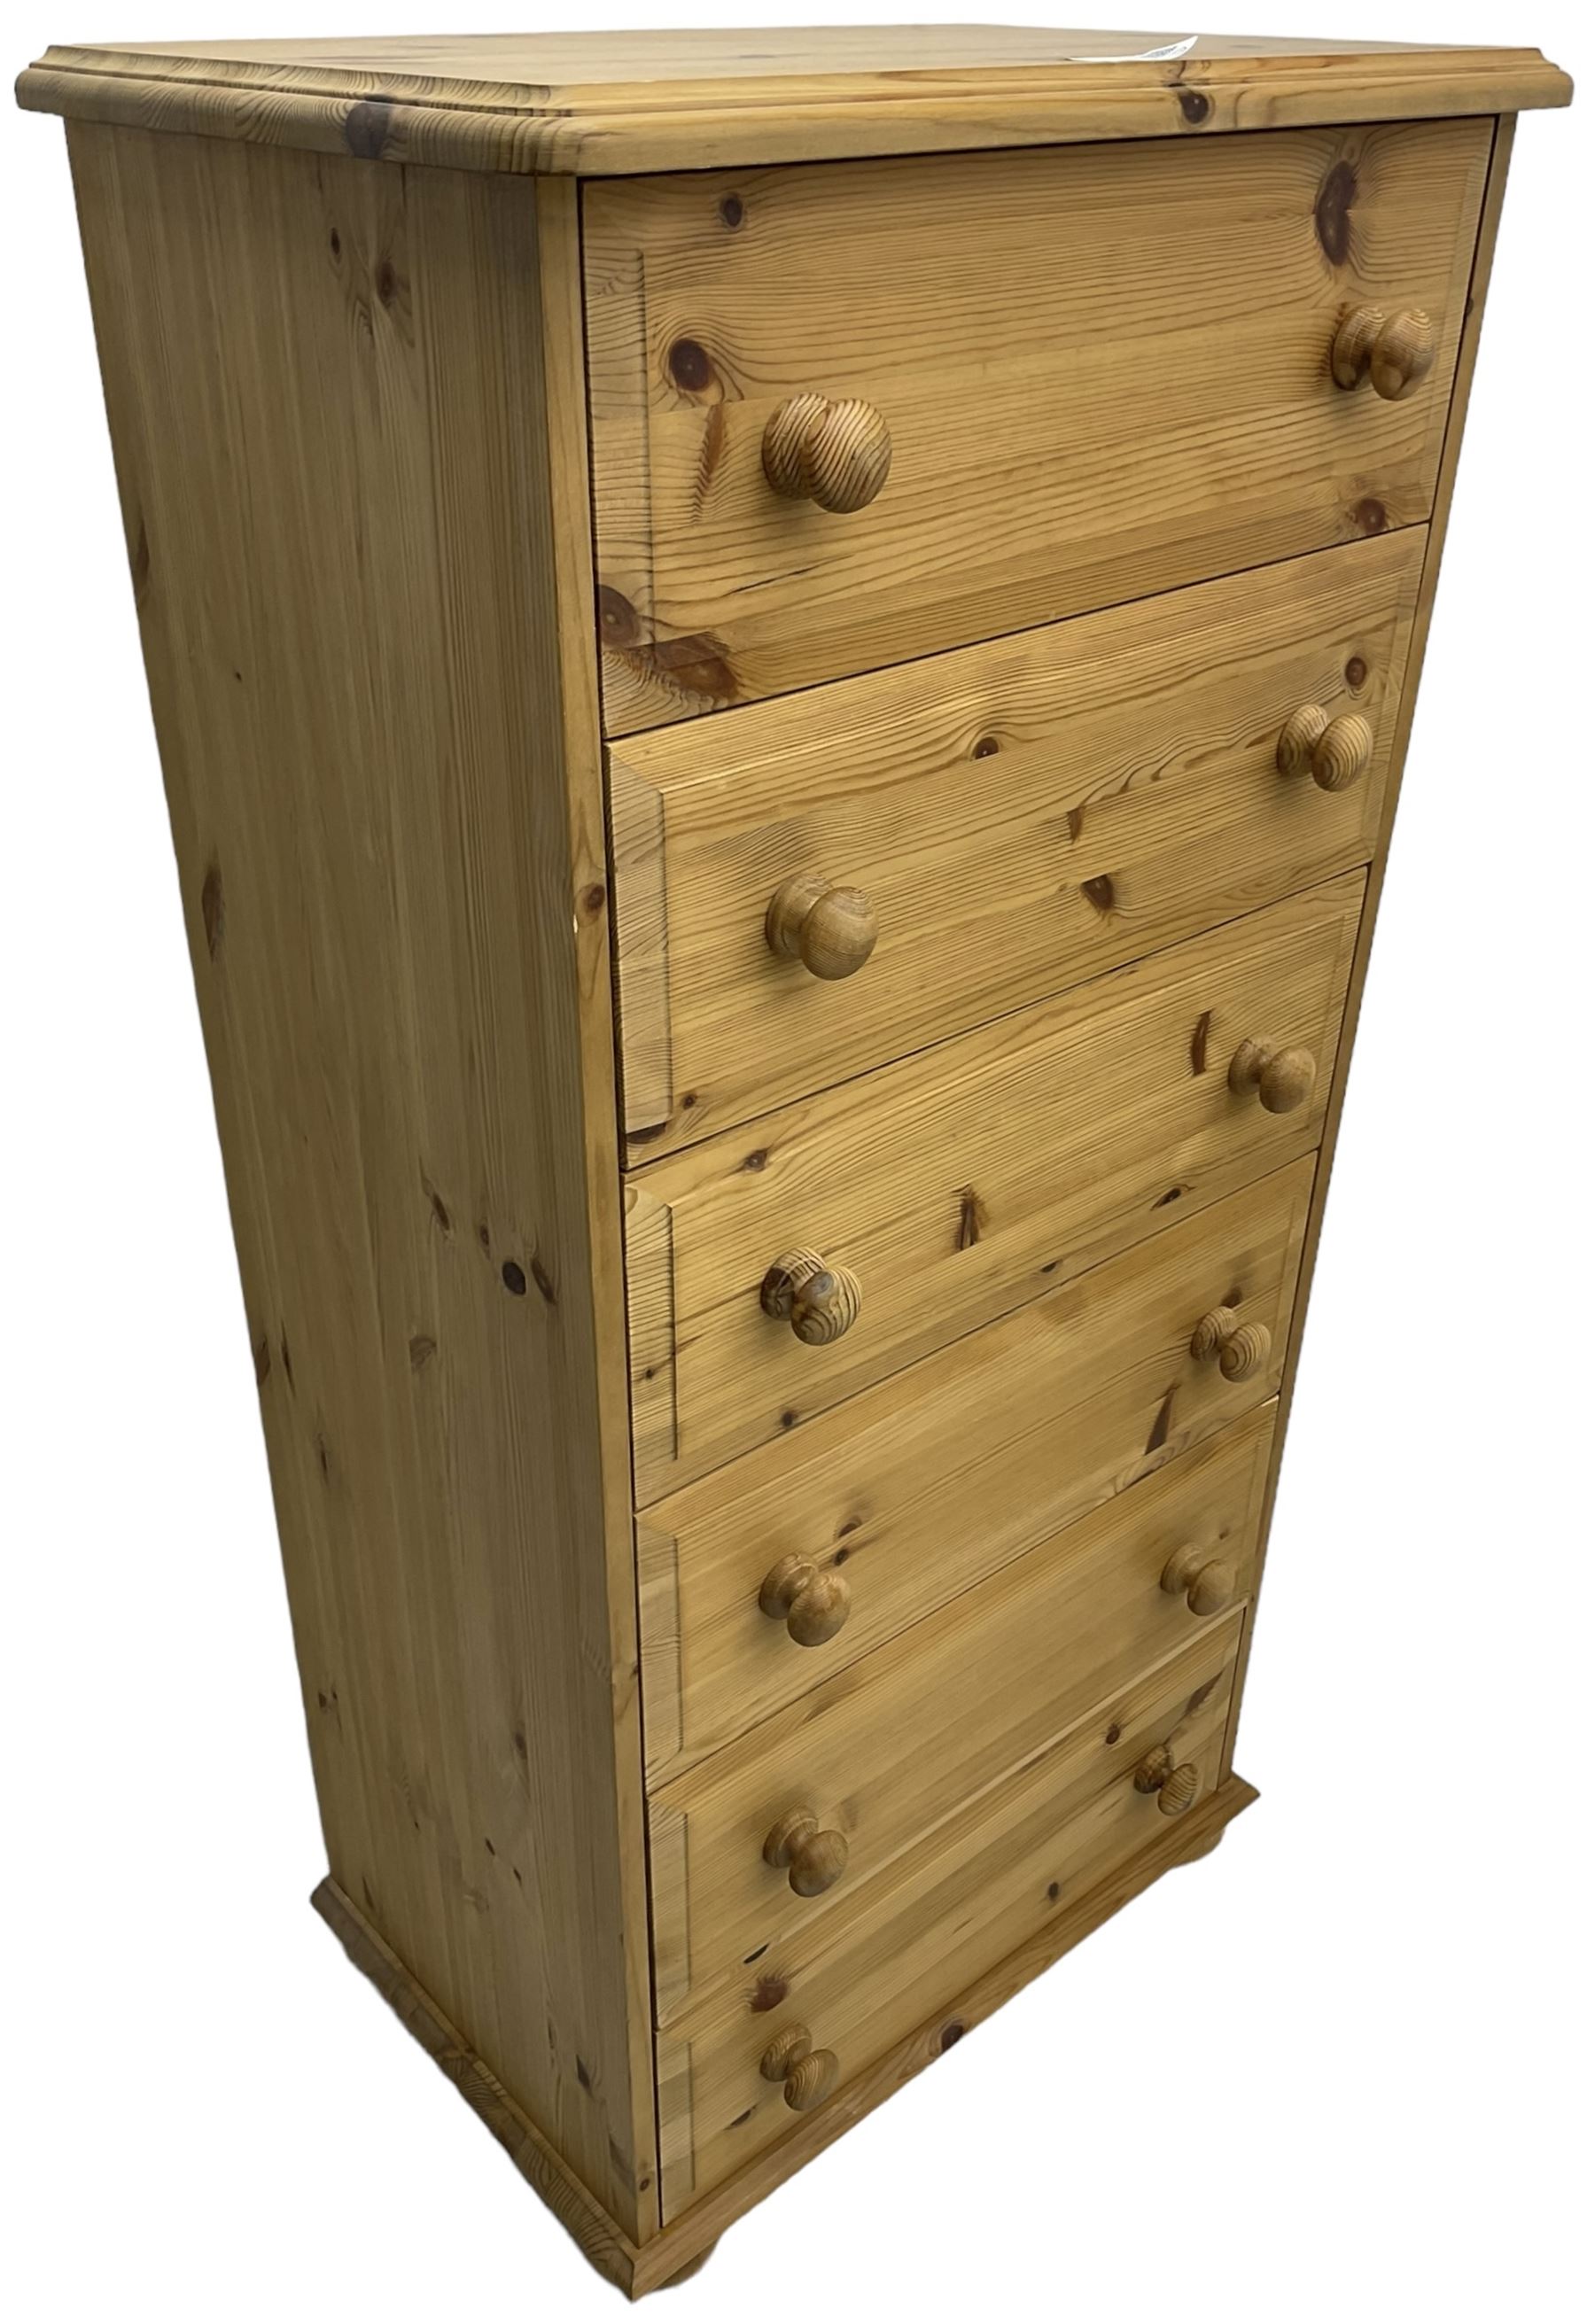 Traditional pine tall chest - Image 4 of 6